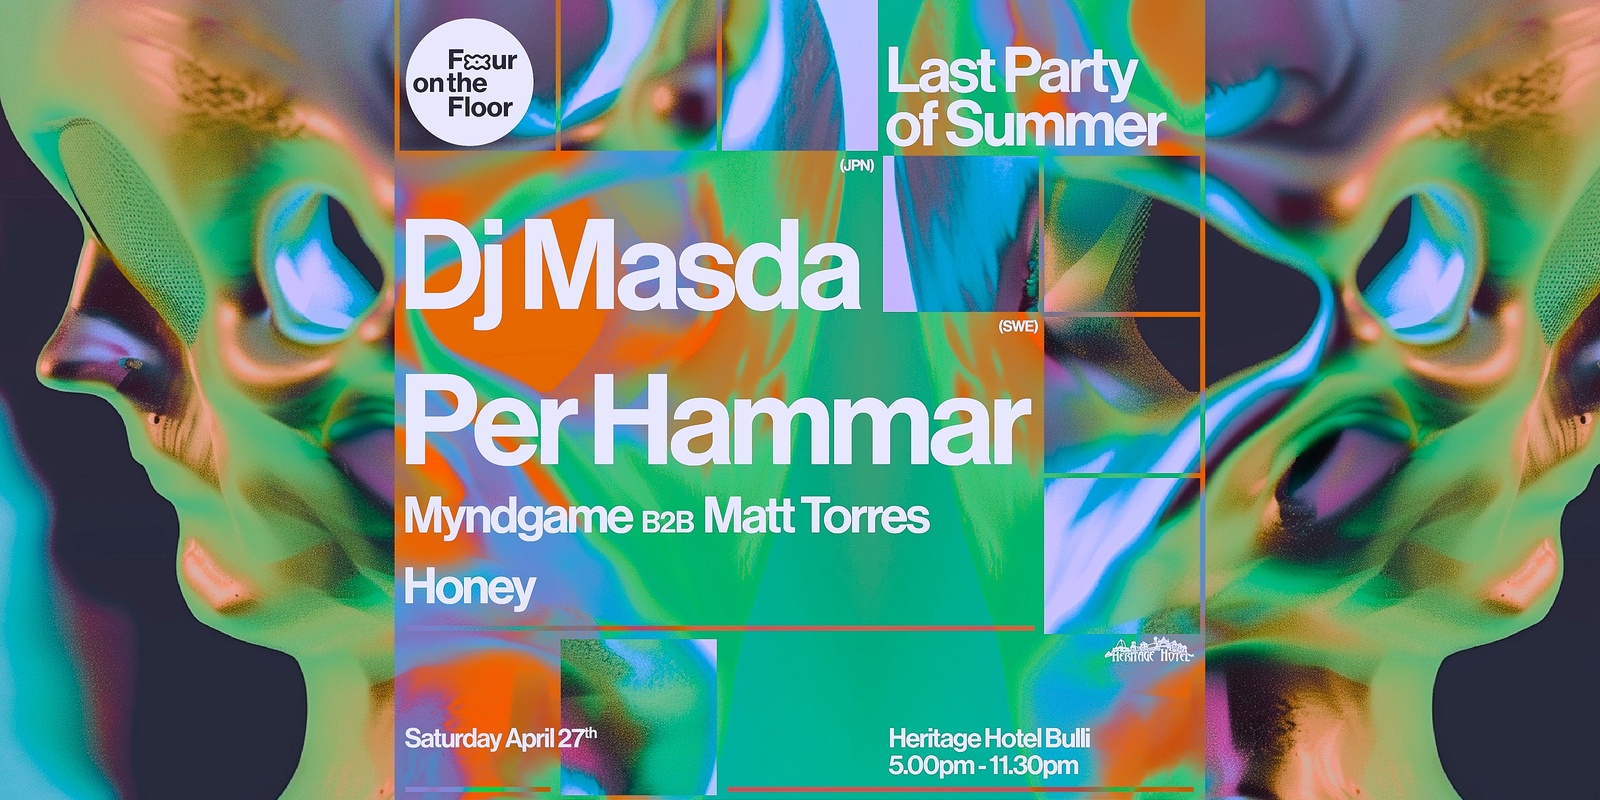 Banner image for Four On The Floor Last Party of Summer with Dj Masda & Per Hammar 